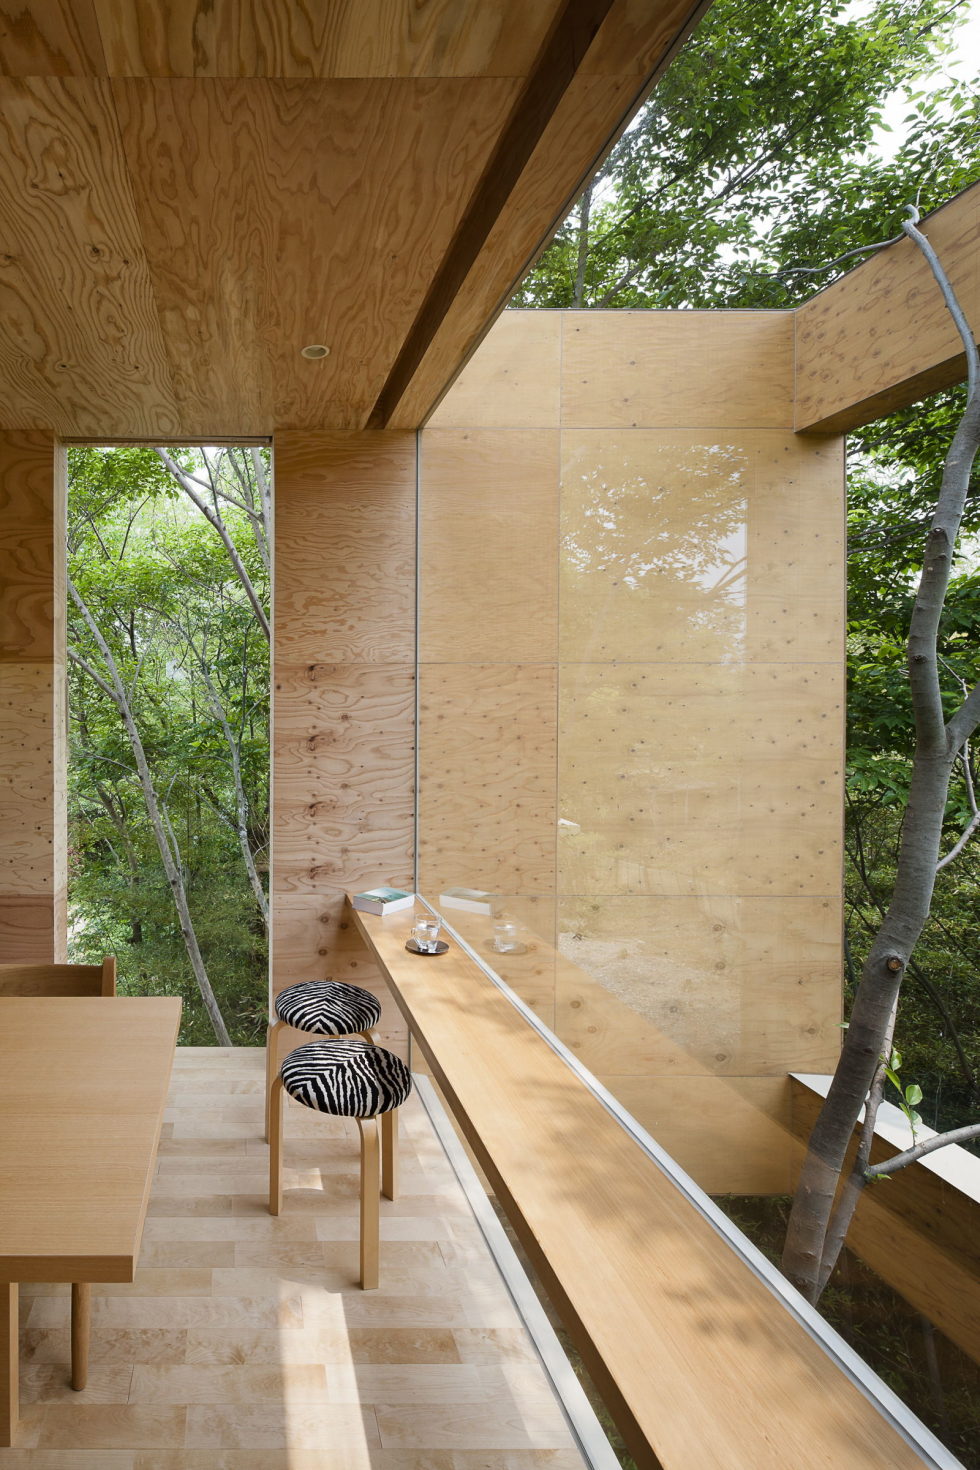 The pendulous over the forest house '+ node' from the UID Architects 5